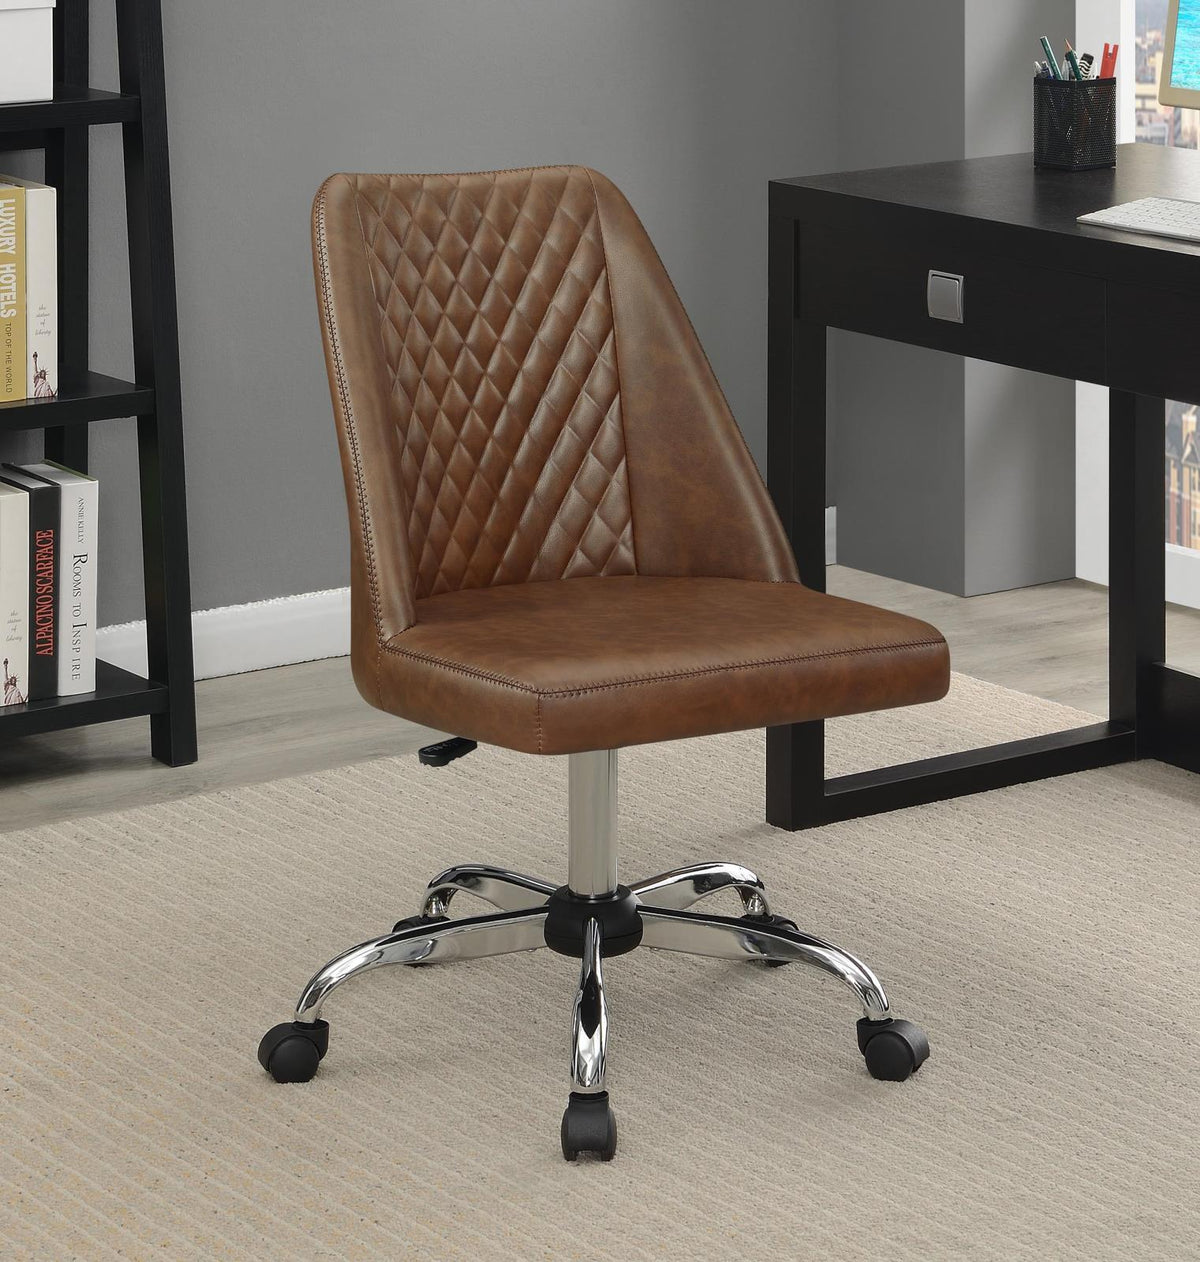 Althea Upholstered Tufted Back Office Chair Brown and Chrome Althea Upholstered Tufted Back Office Chair Brown and Chrome Half Price Furniture